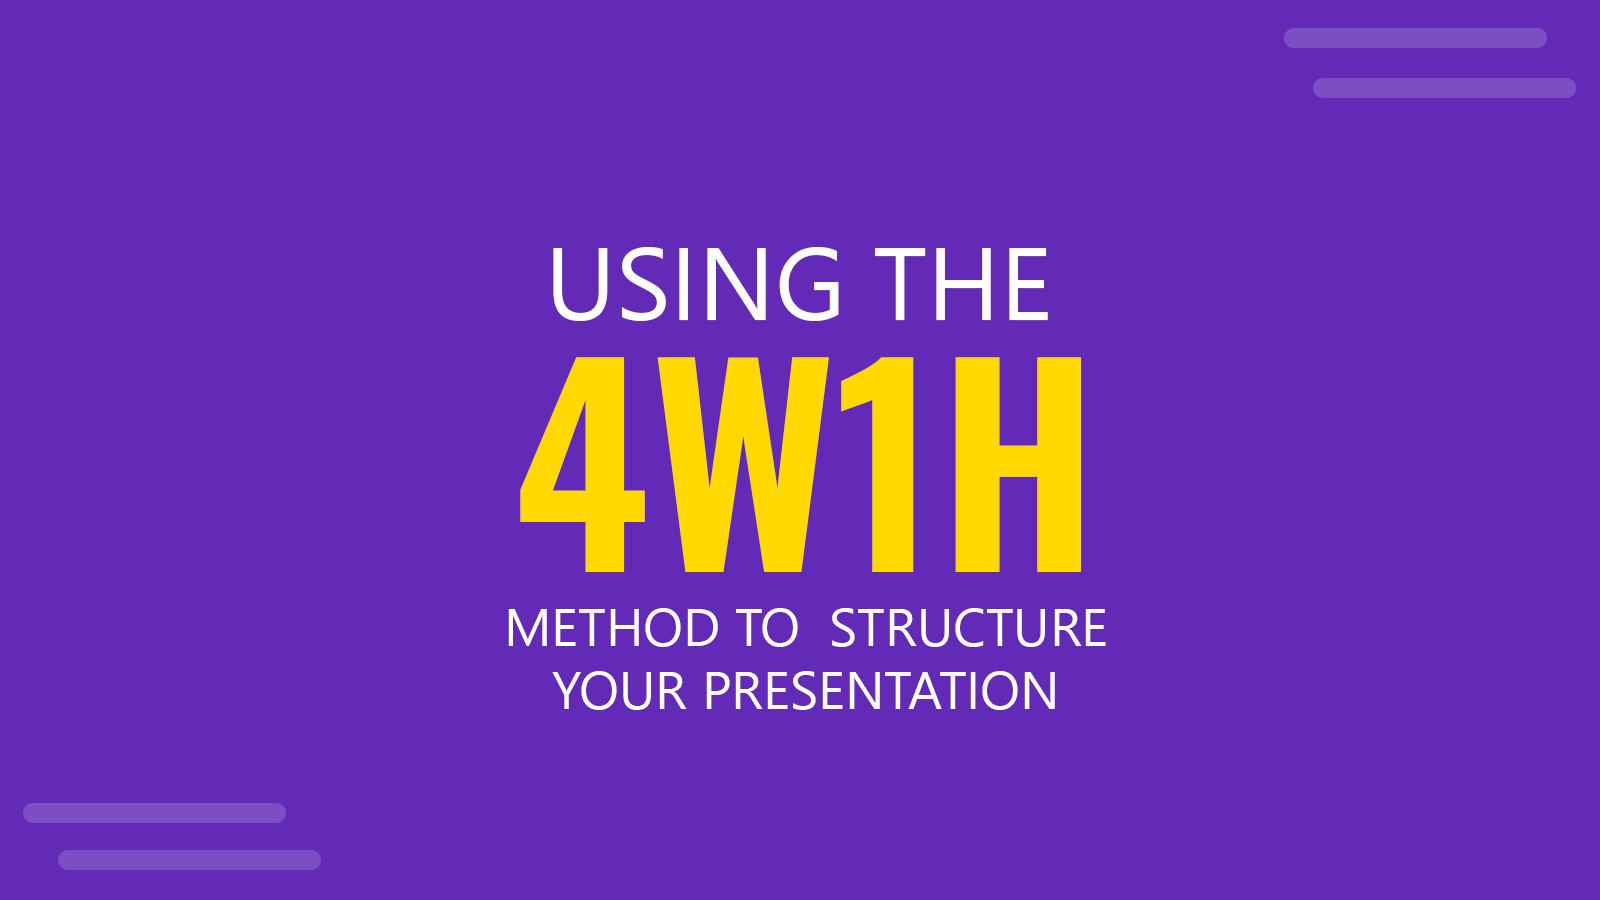 Using the 4W1H Method to Structure a Presentation